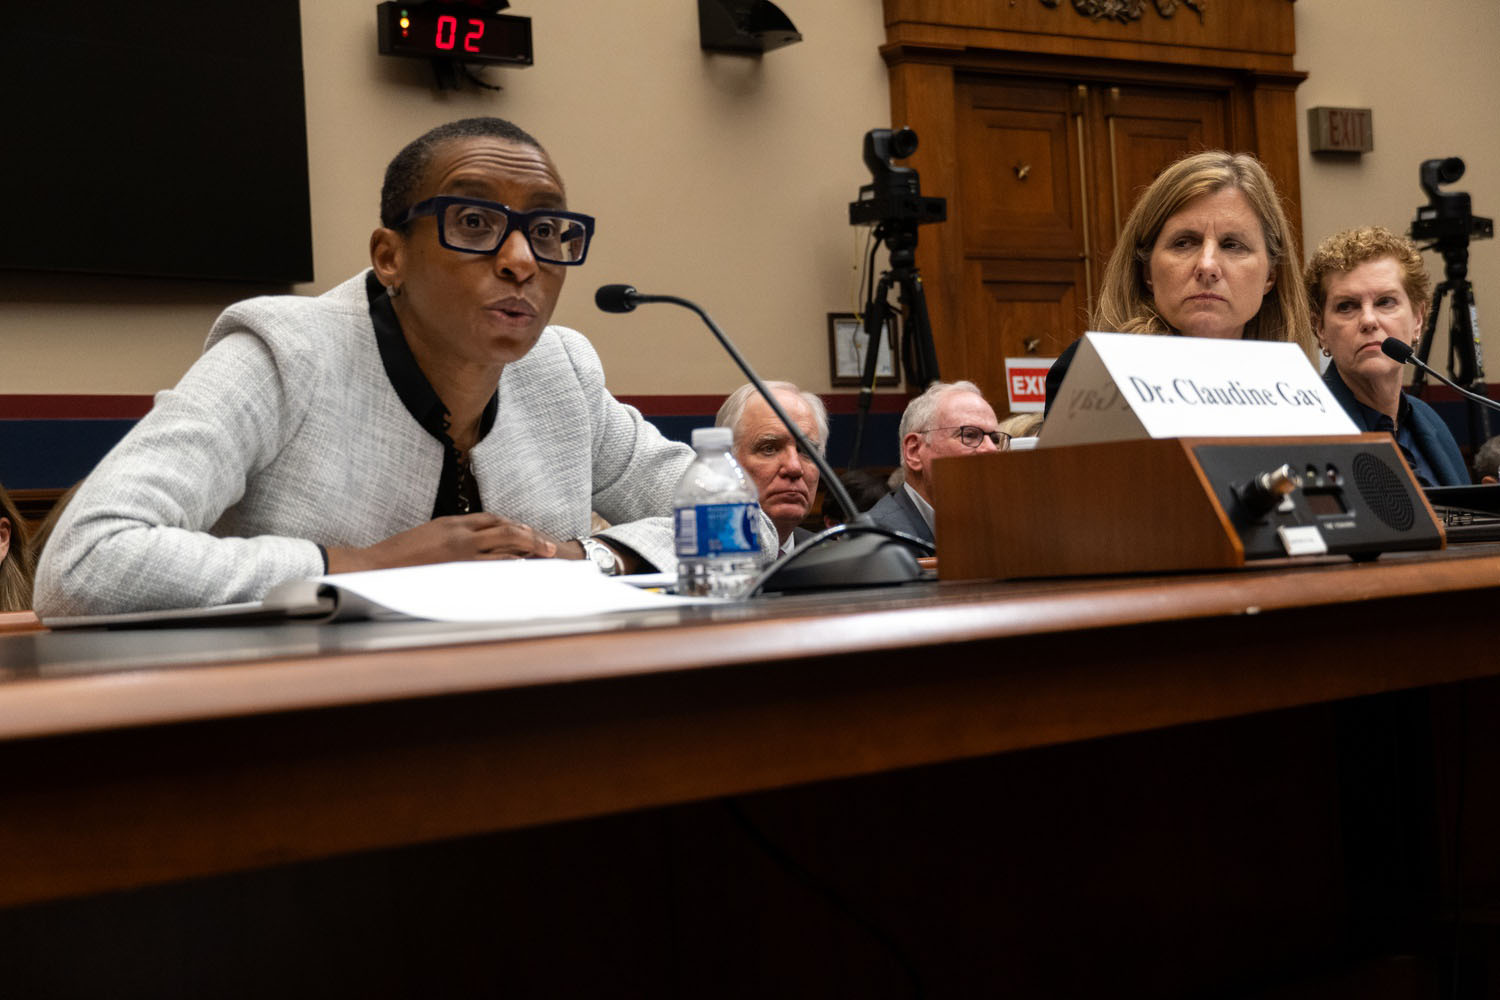 Harvard President Claudine Gay testified before the House Committee on Education and the Workforce for a hearing on antisemitism at college campuses.